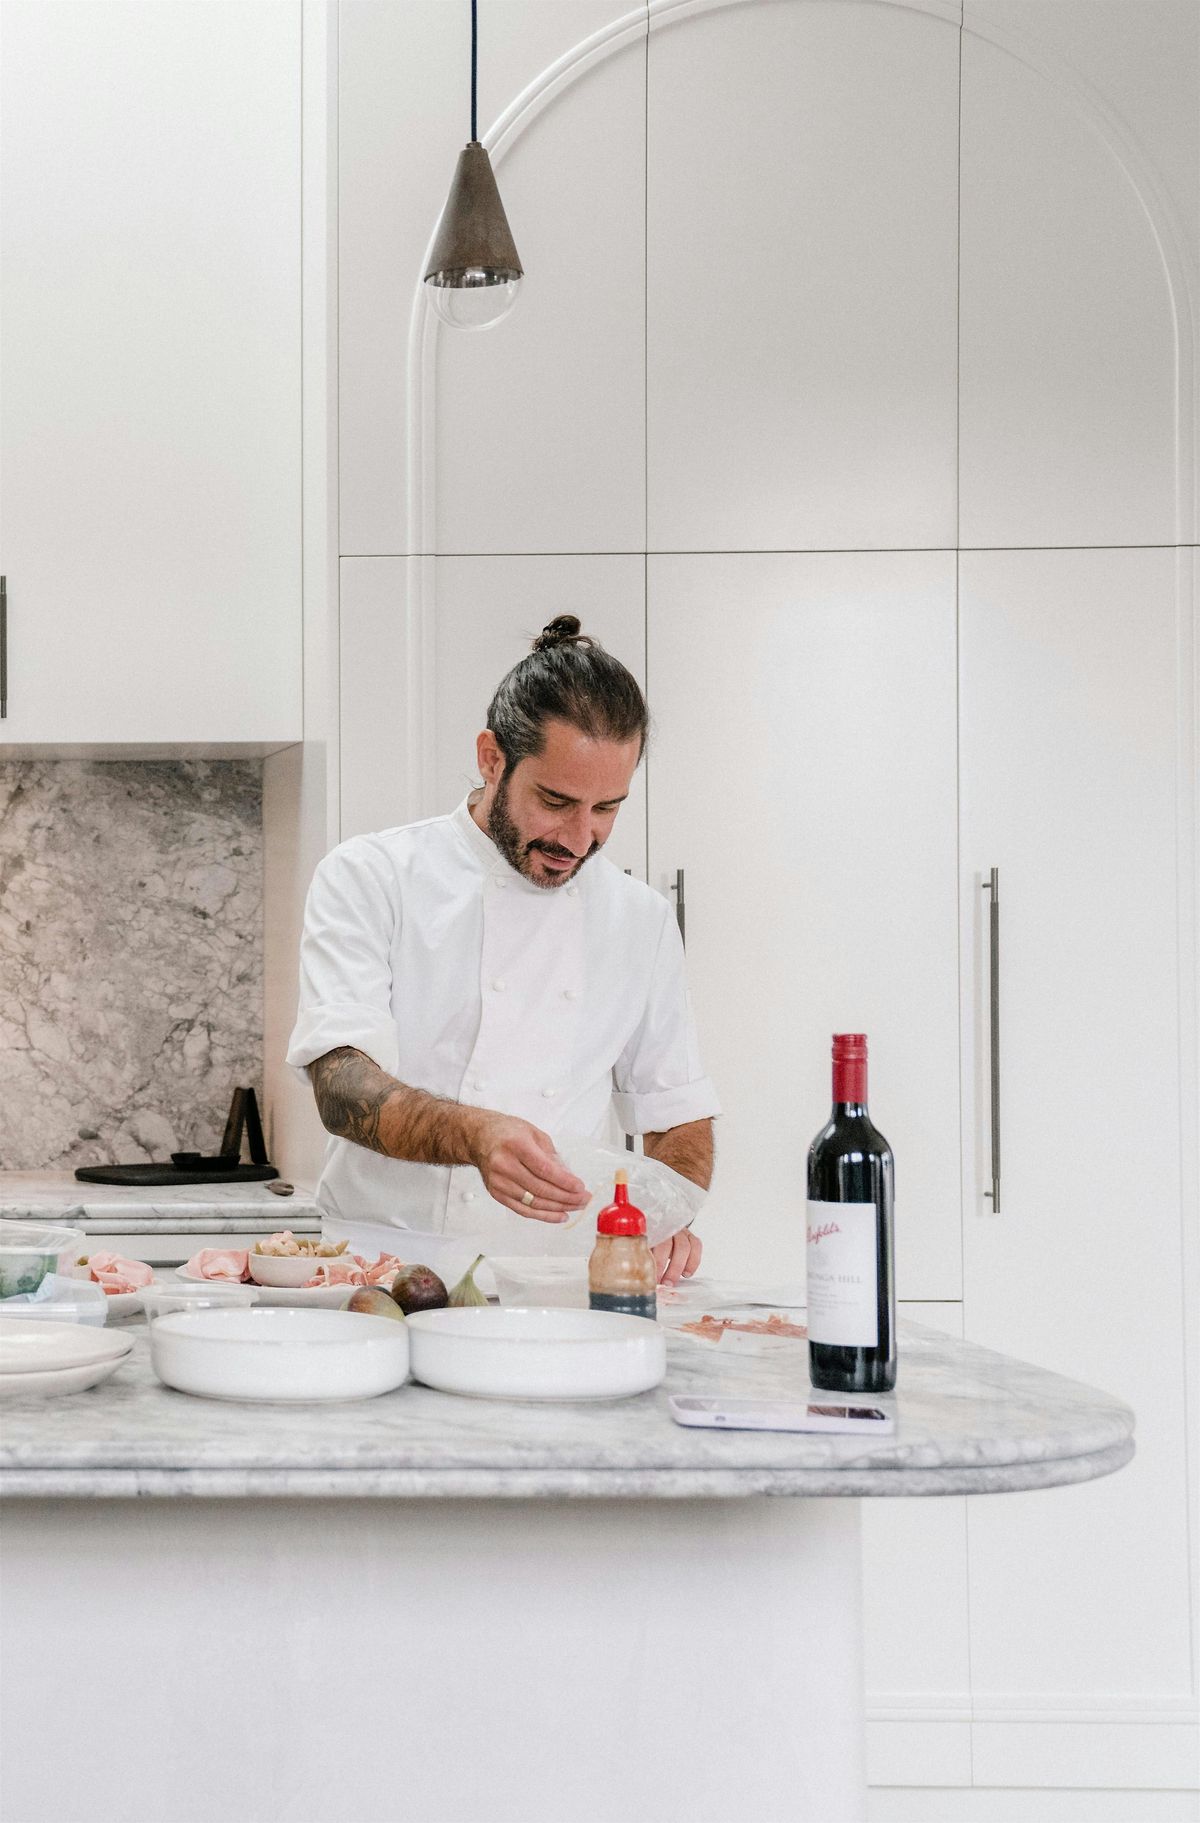 One night in Italy with Chef Luca Faccin